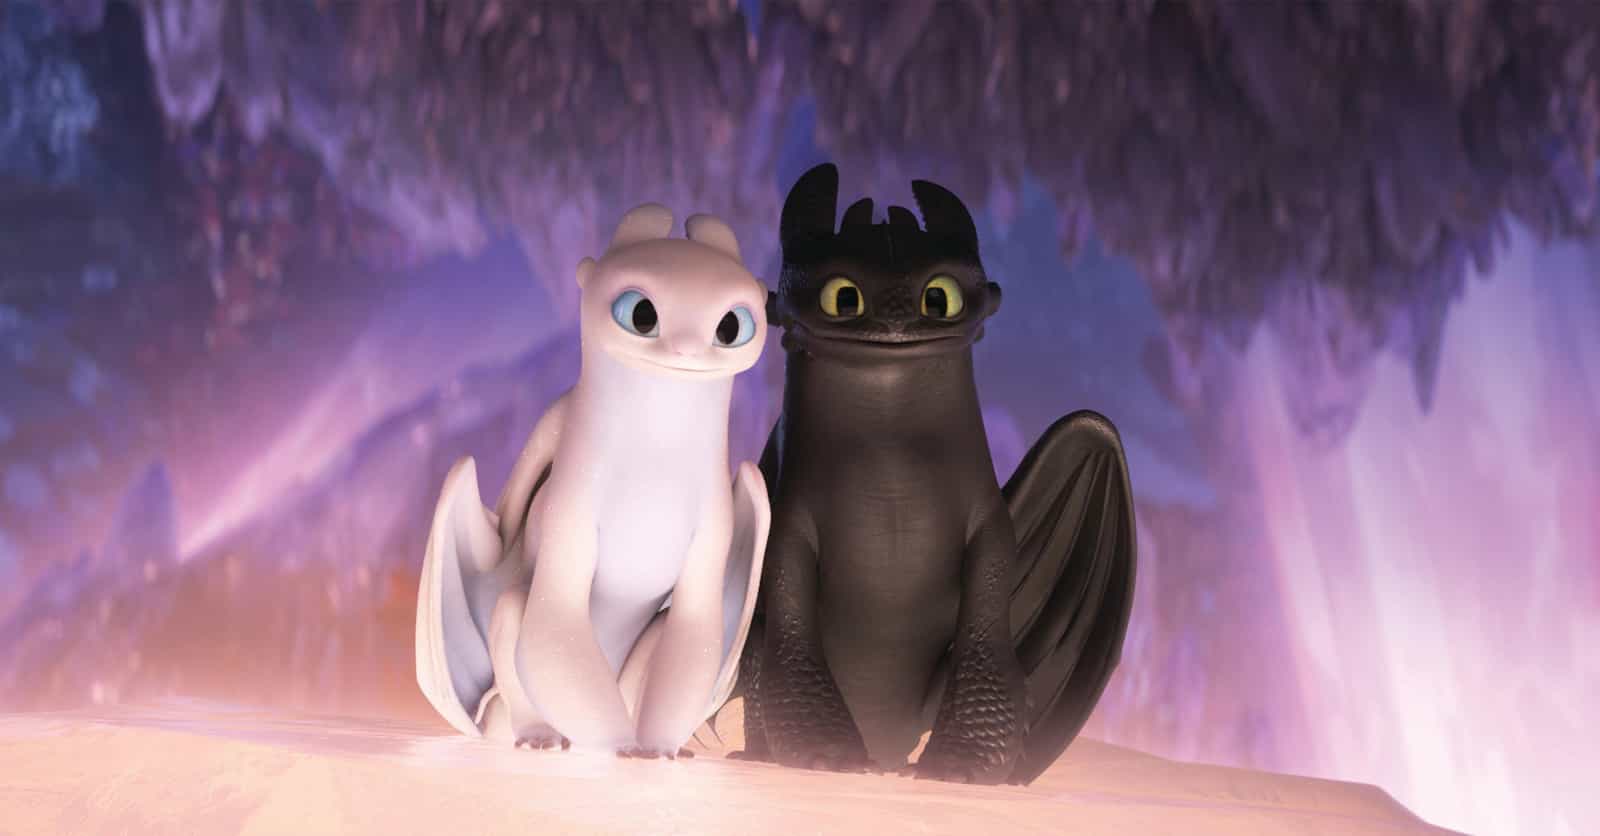 15 Fan Theories About DreamWorks Movies That Make A Lot Of Sense